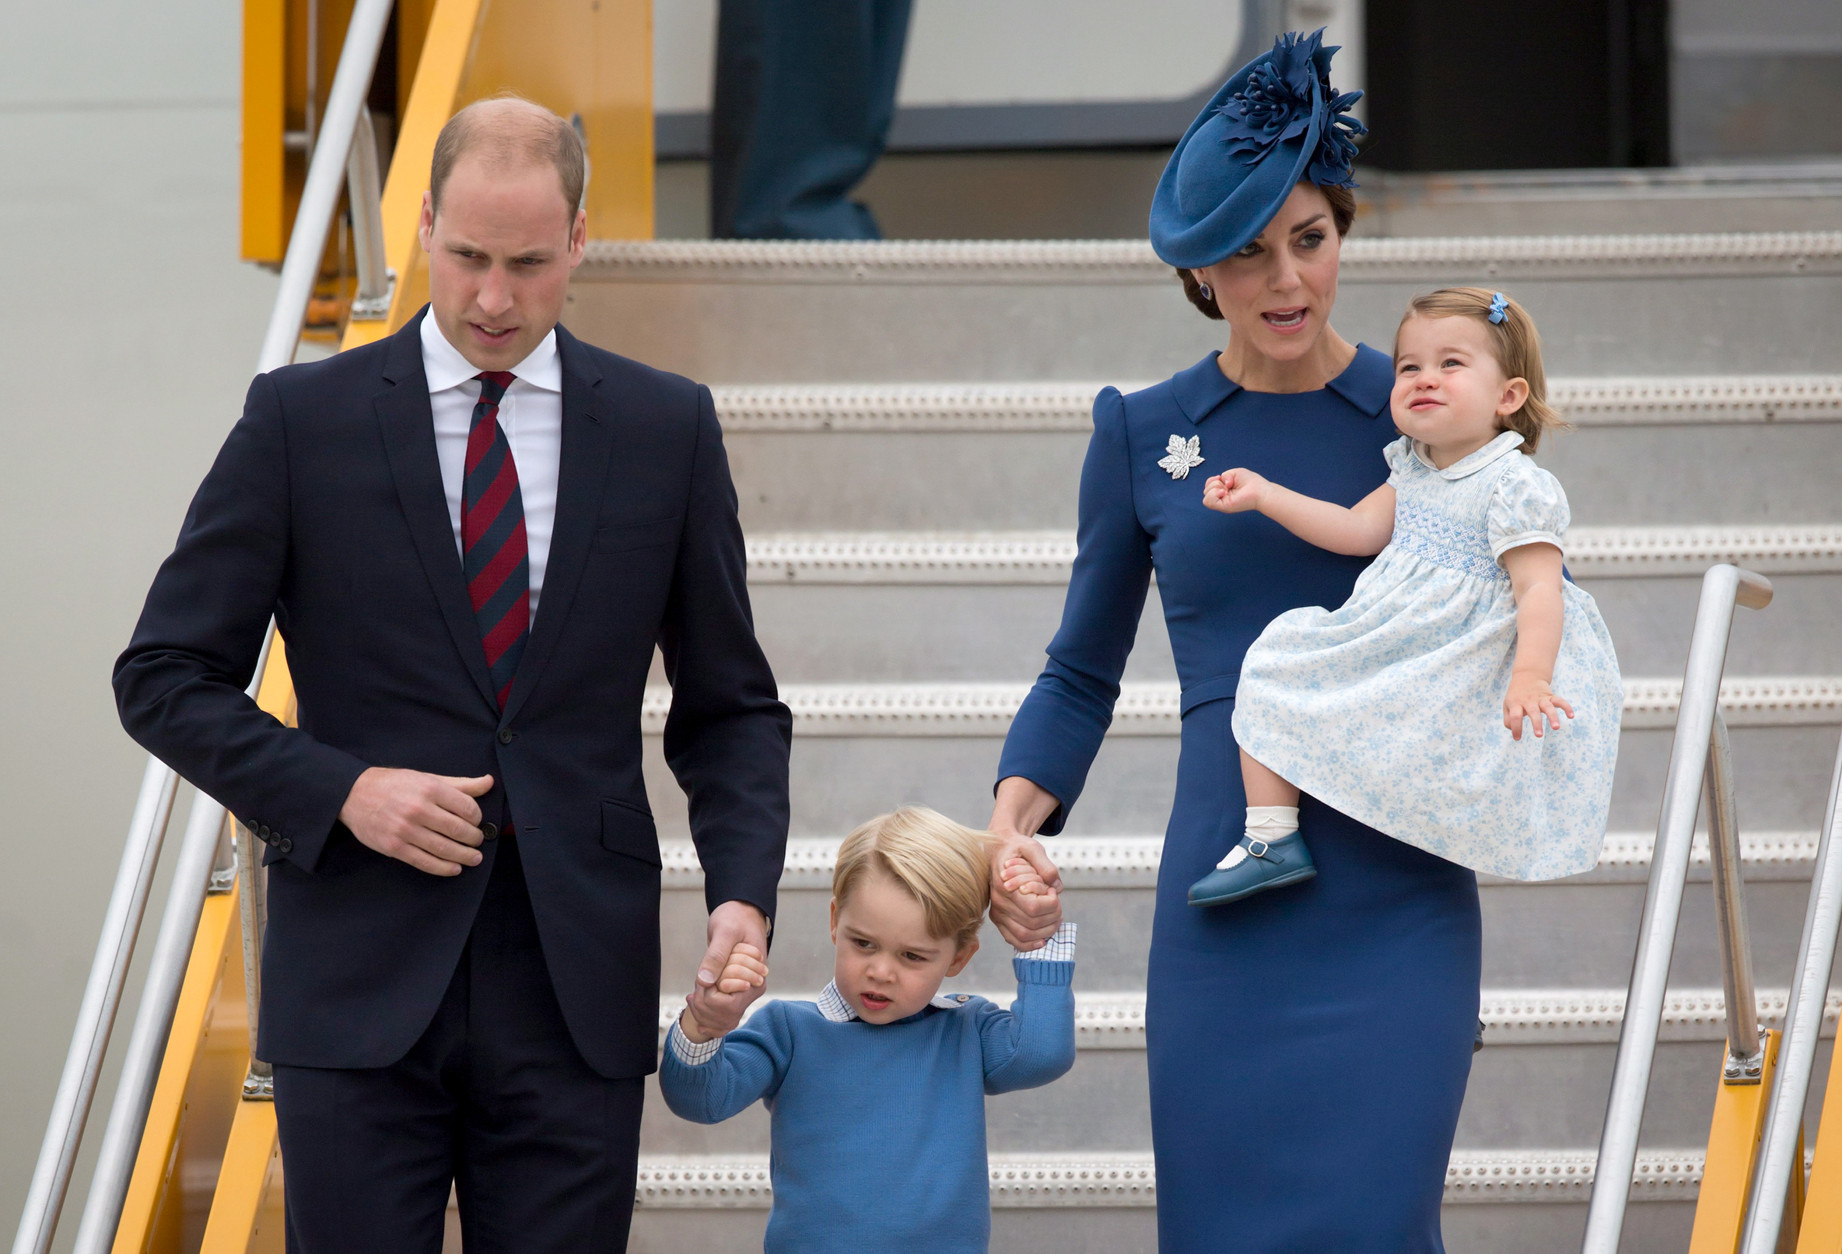 Britain's Prince William and his wife Kate, the Duke and Duchess of Cambridge, along with their children Prince George and Princess Charlotte arrive in Victoria, British Columbia, Saturday, Sept. 24, 2016. (Darryl Dyck/The Canadian Press via AP)